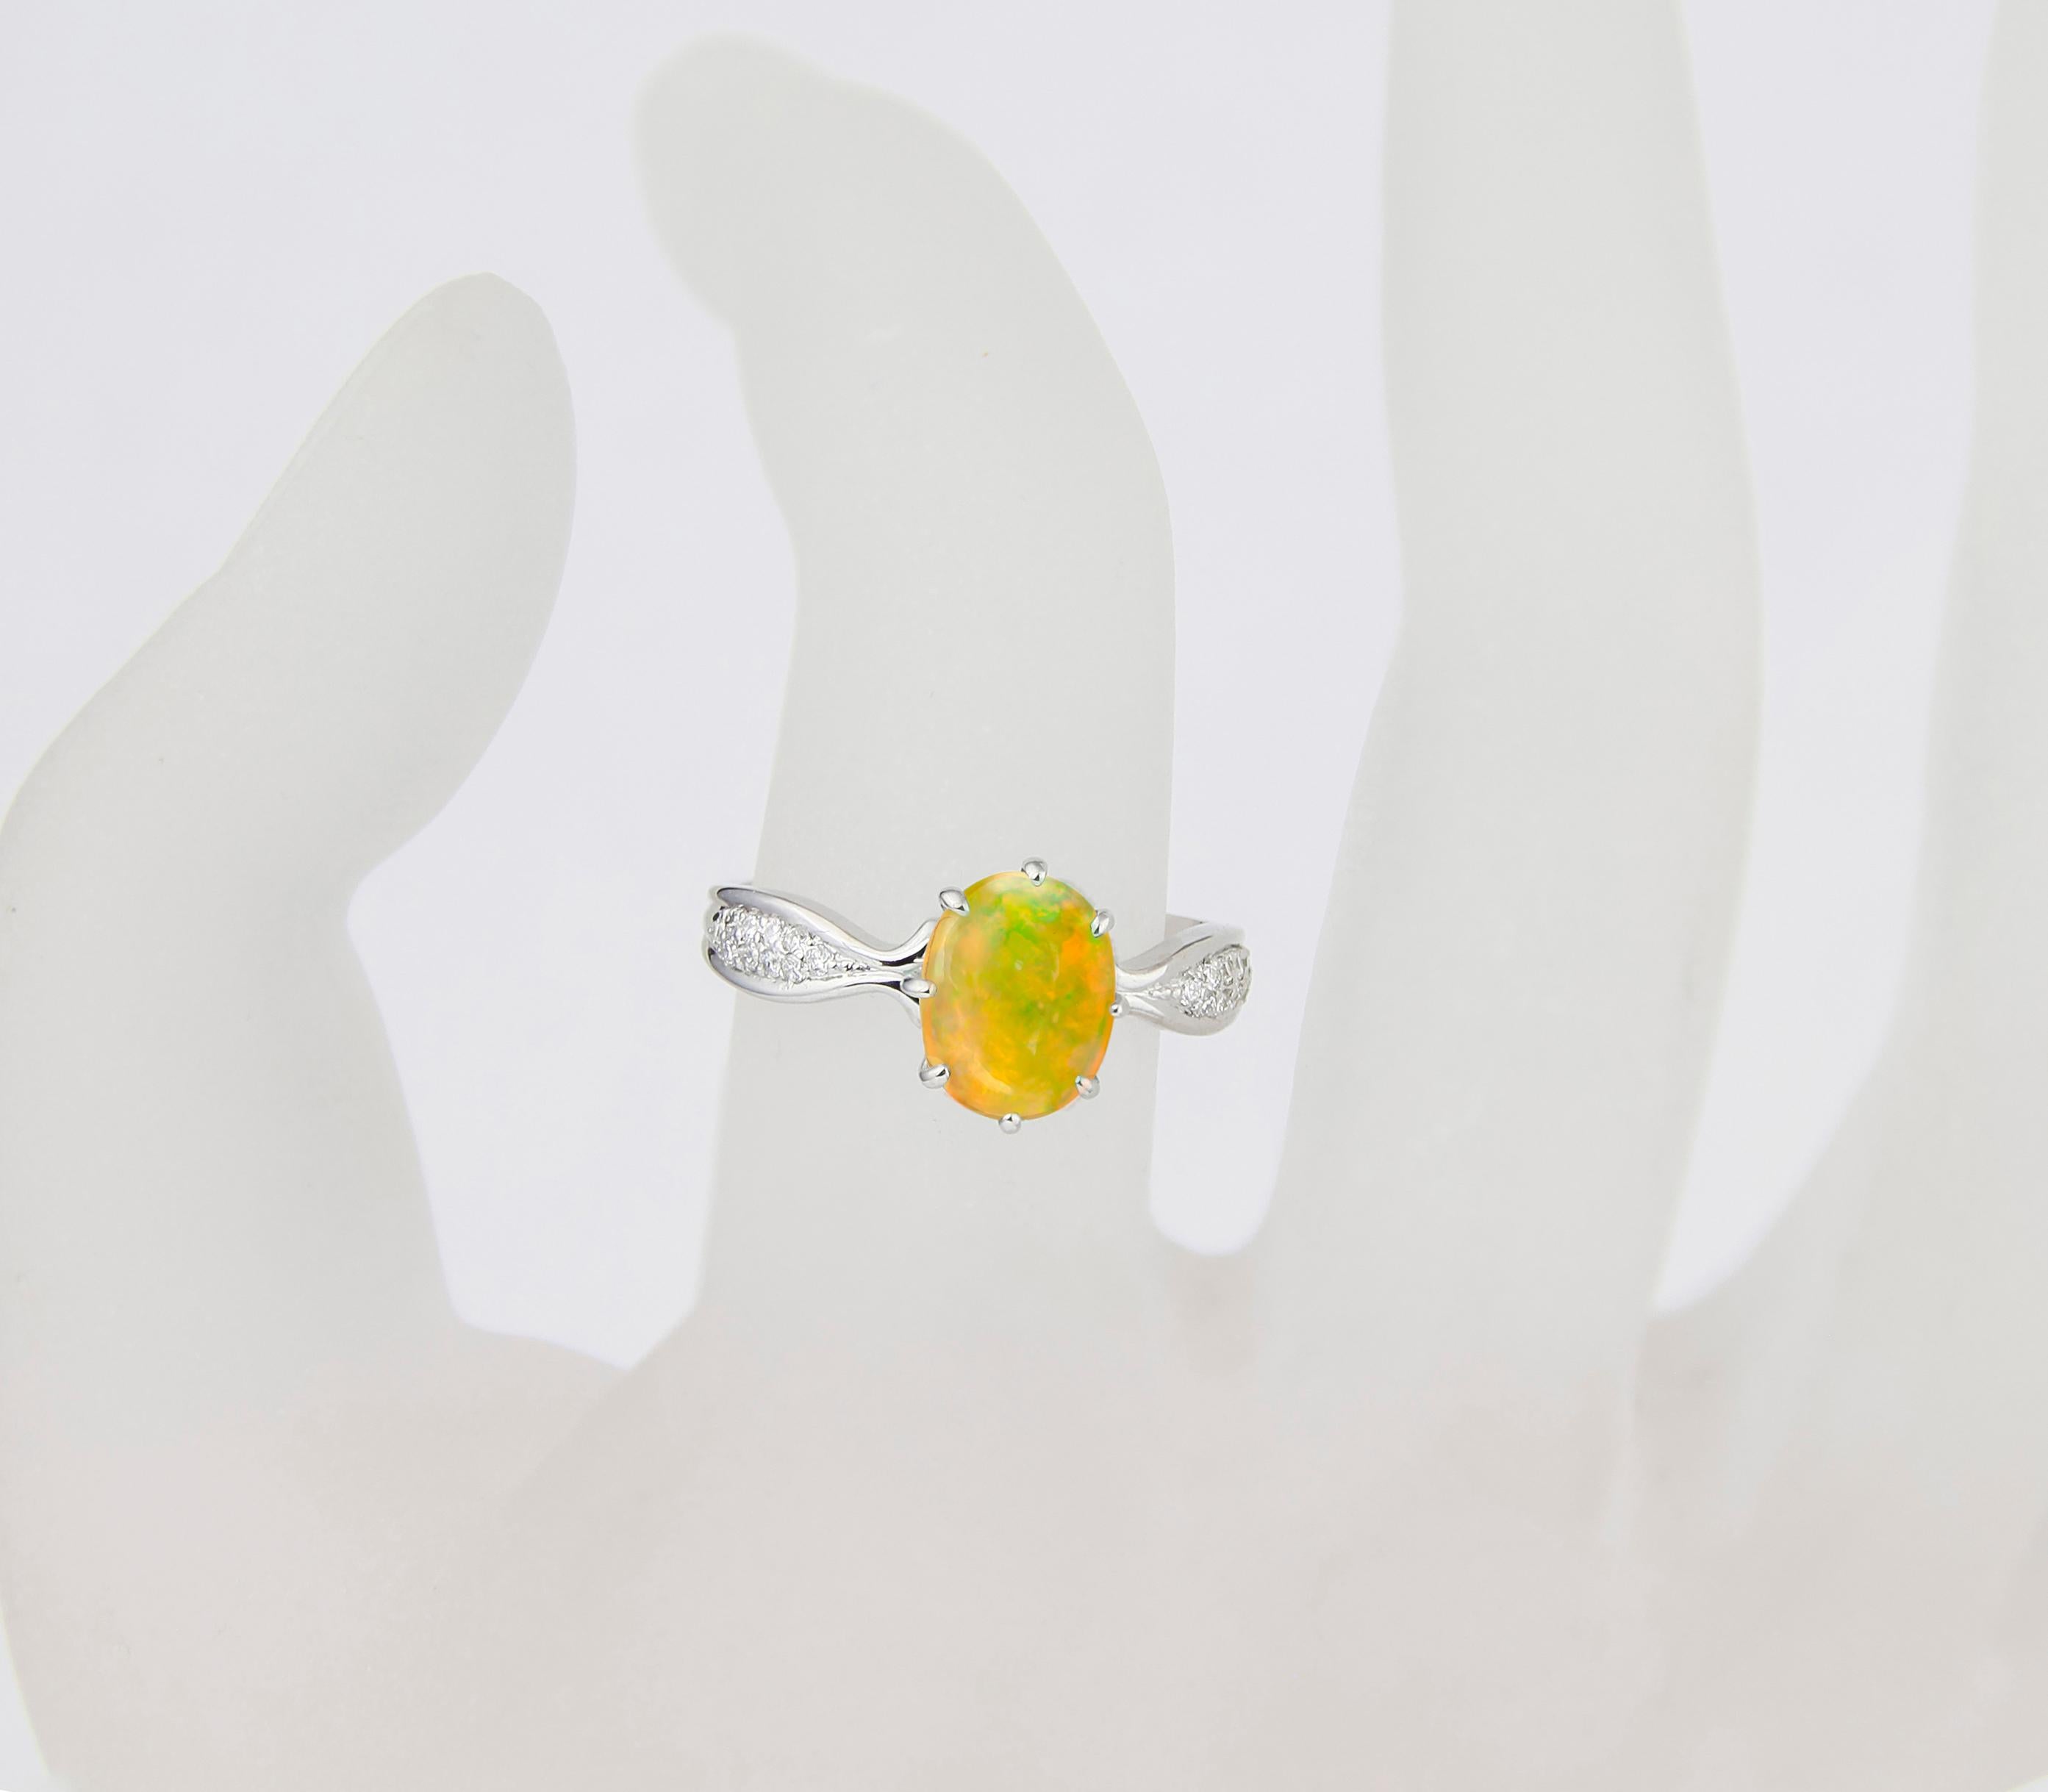 For Sale:  Opal 14k Gold Ring, Cabochon Opal Ring, Opal Gold Ring 7